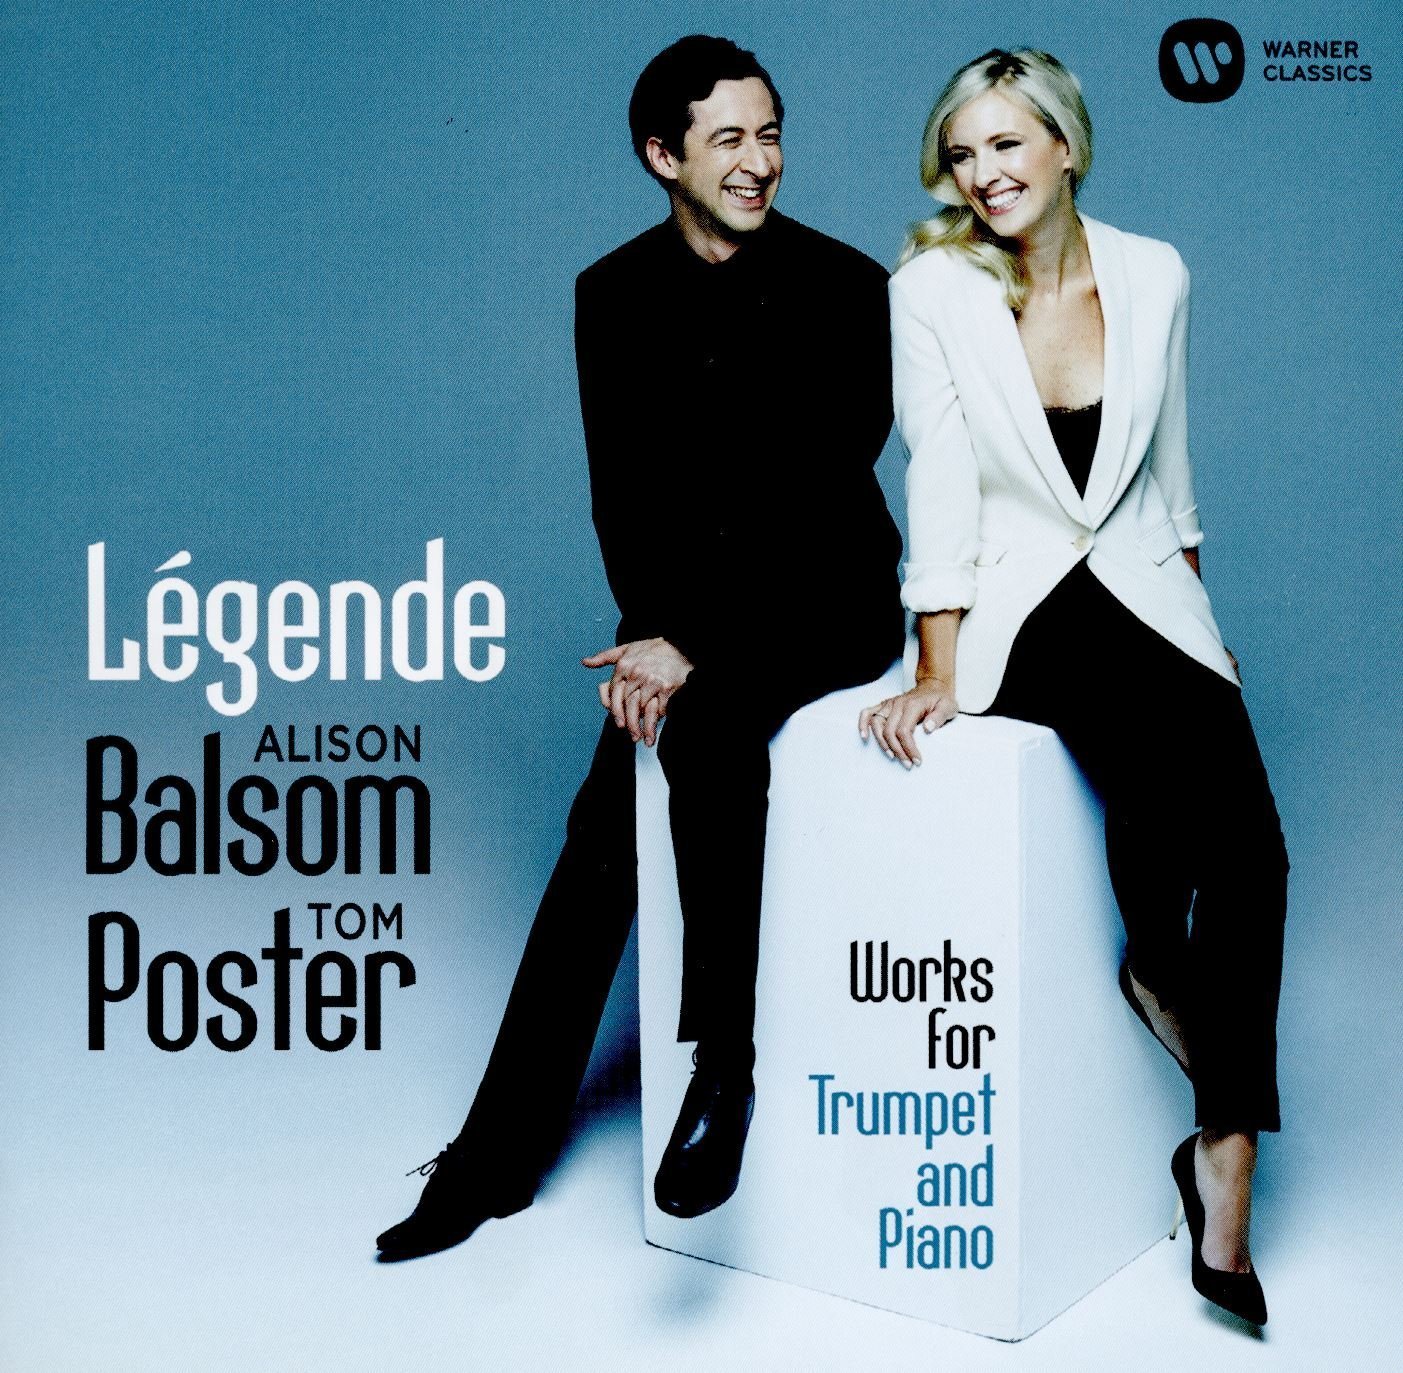 Legende - Music for Trumpet and Piano | Tom Poster, Alison Balsom